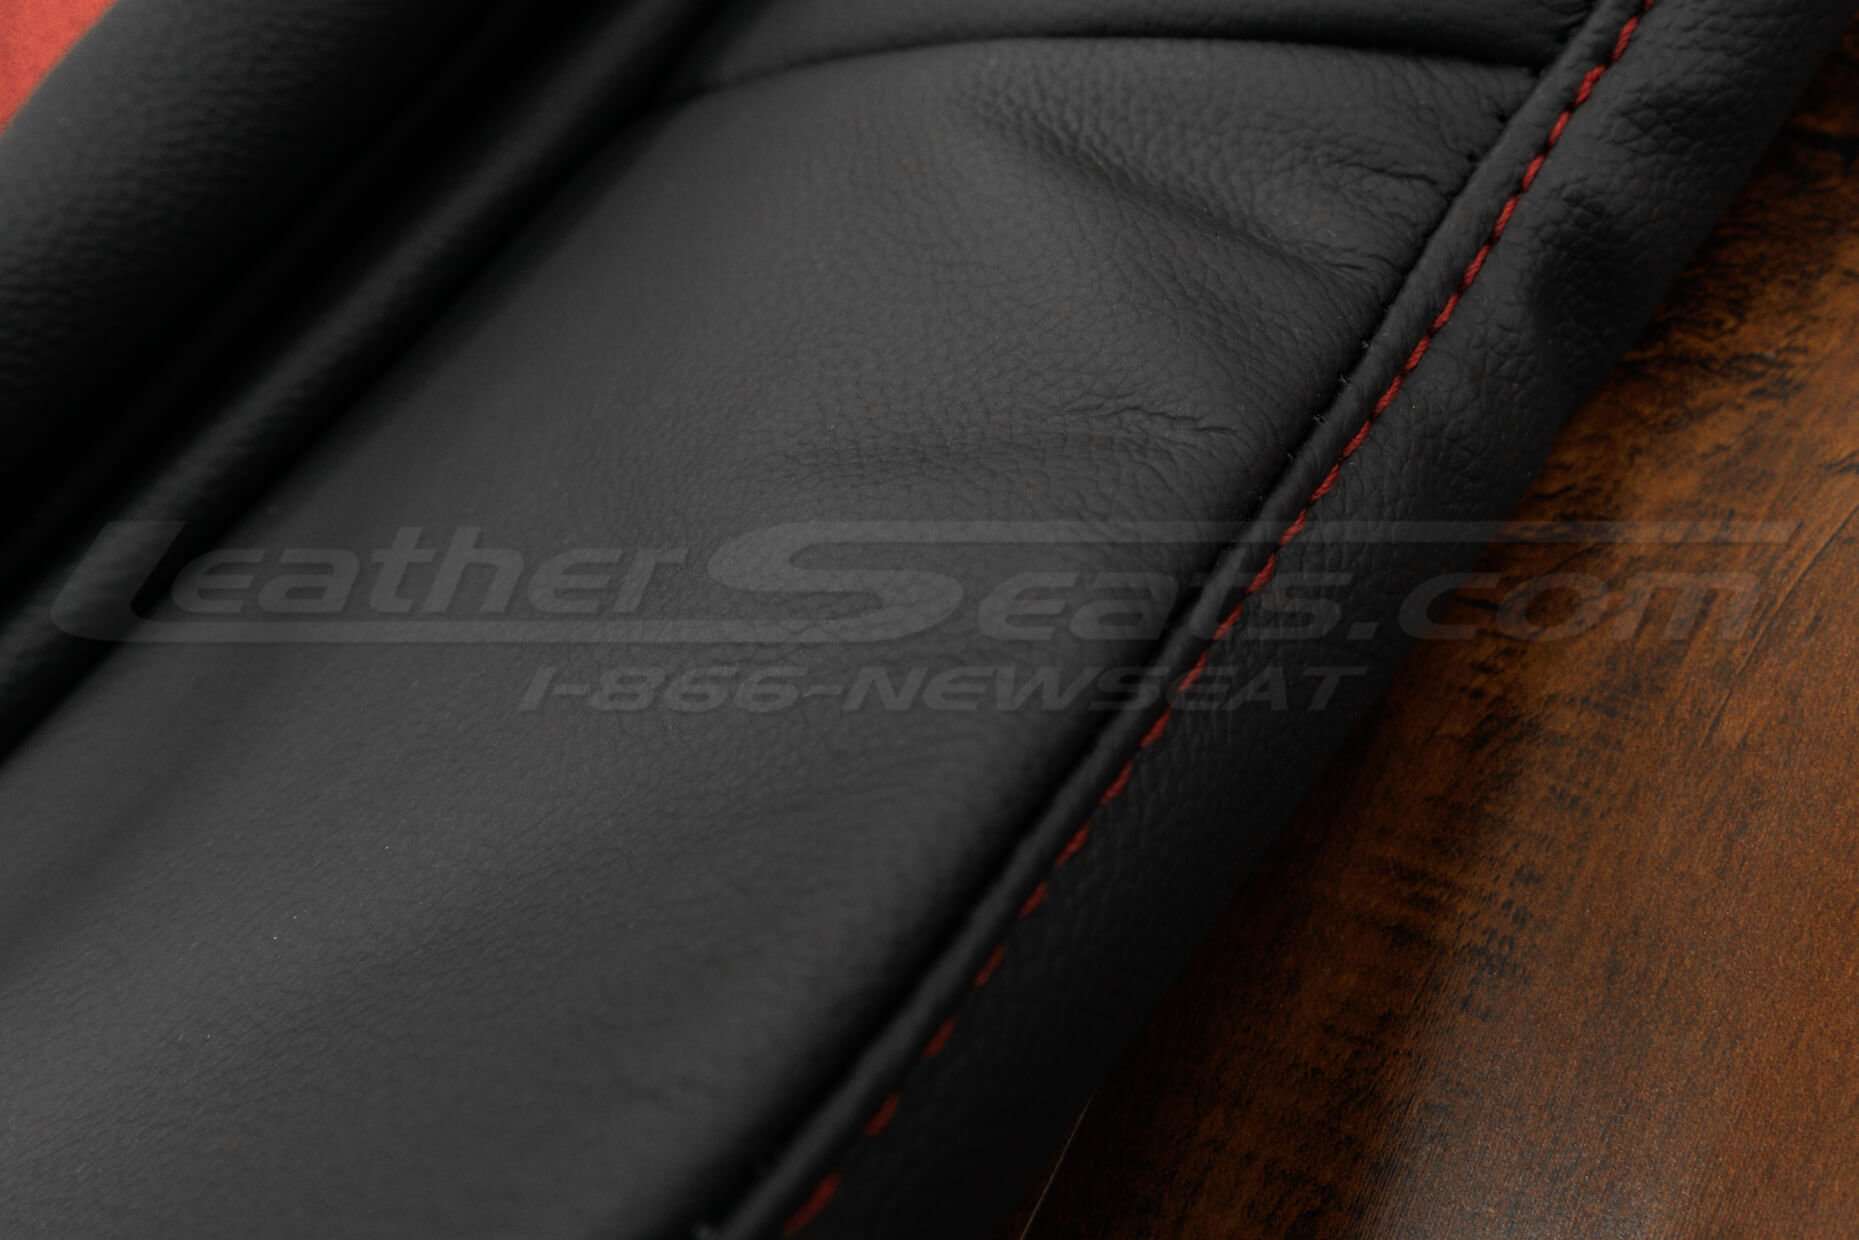 Honda S2000 Roadster Upholstery Kit - Black & Red - Side red stitching alternative view